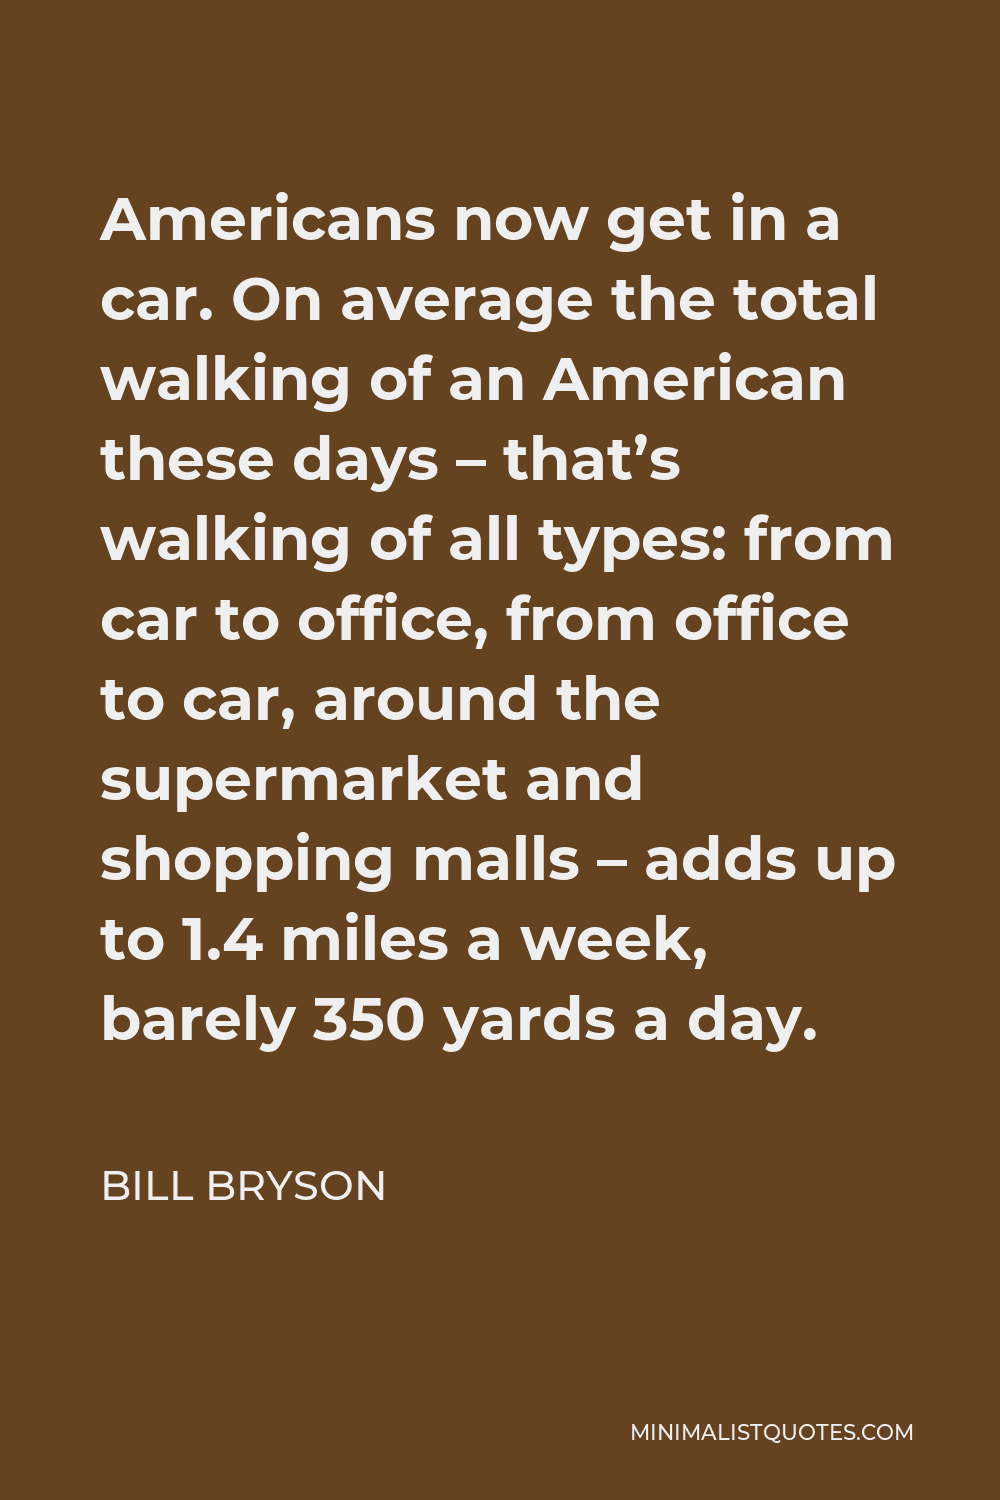 Bill Bryson Quote - Americans now get in a car. On average the total walking of an American these days – that’s walking of all types: from car to office, from office to car, around the supermarket and shopping malls – adds up to 1.4 miles a week, barely 350 yards a day.